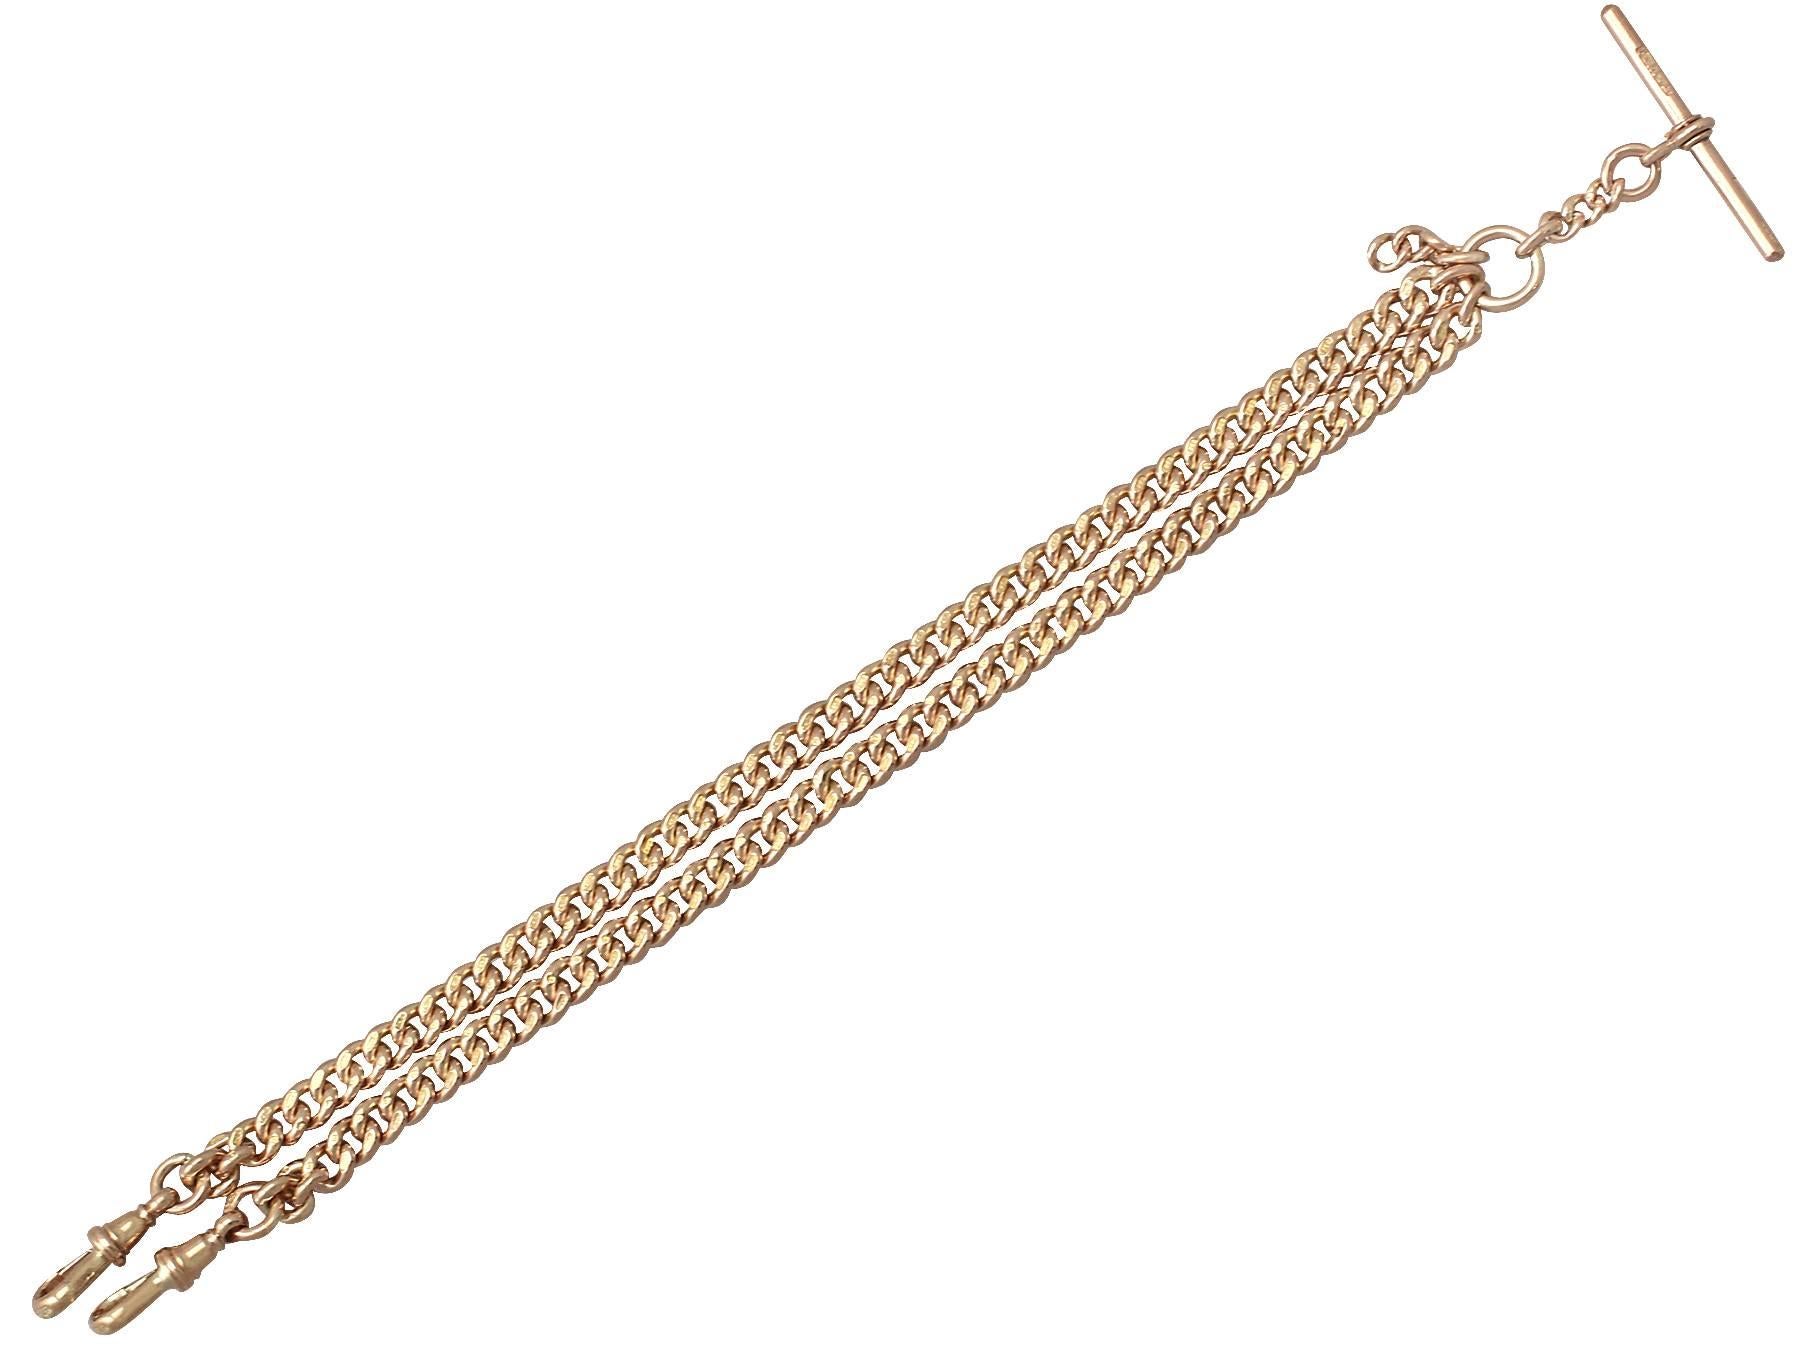 A fine and impressive antique 9 karat rose gold double Albert watch chain; part of our antique jewelry and estate jewelry collections

This fine and impressive antique Albert watch chain has been crafted in 9k rose gold.

The rounded curb chain